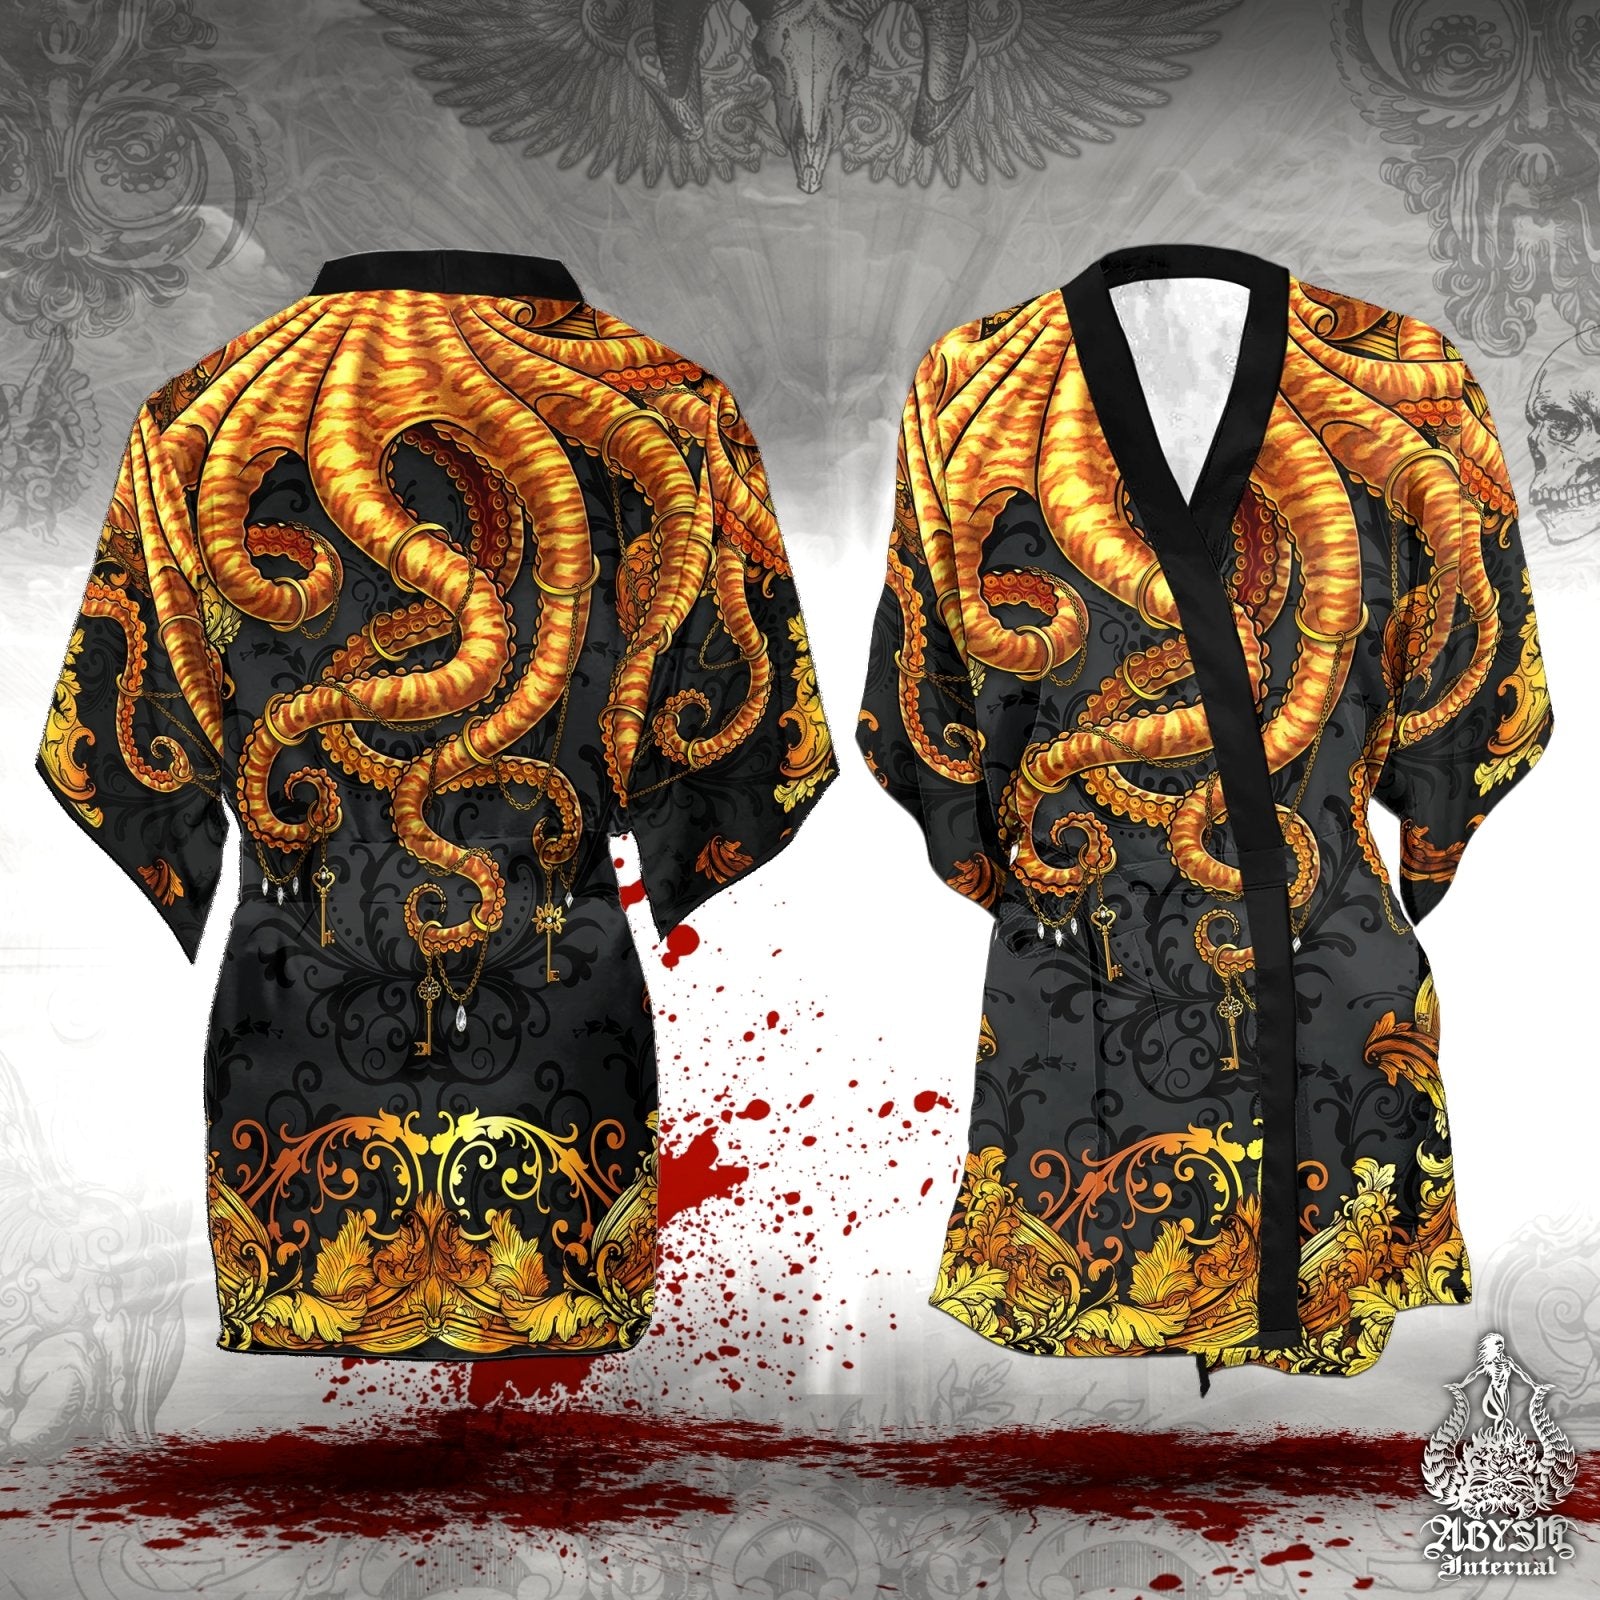 Beach Cover Up, Beach Outfit, Octopus Party Kimono, Summer Festival Robe, Indie and Alternative Clothing, Unisex - Gold Black - Abysm Internal